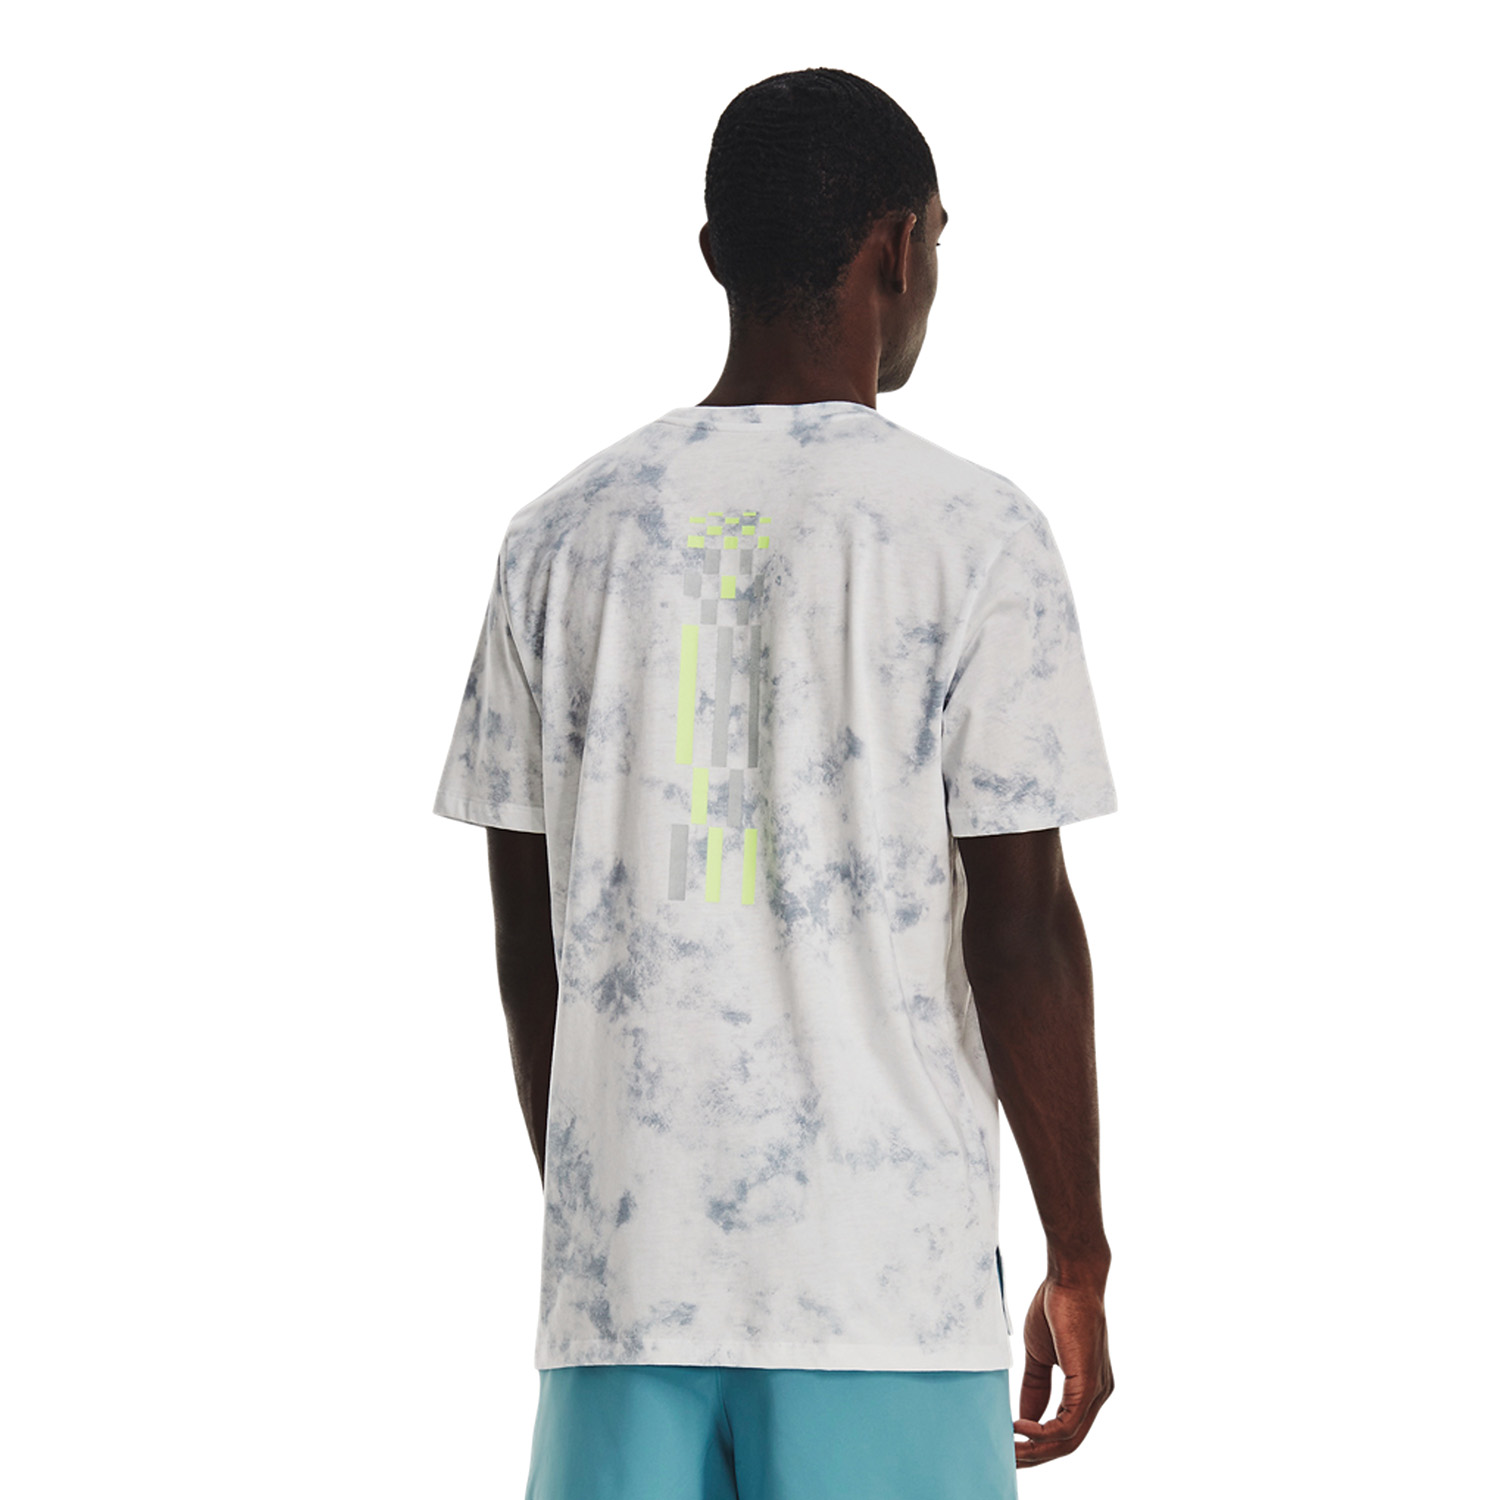 Under Armour Anywhere T-Shirt - Gray Mist/Lime Surge